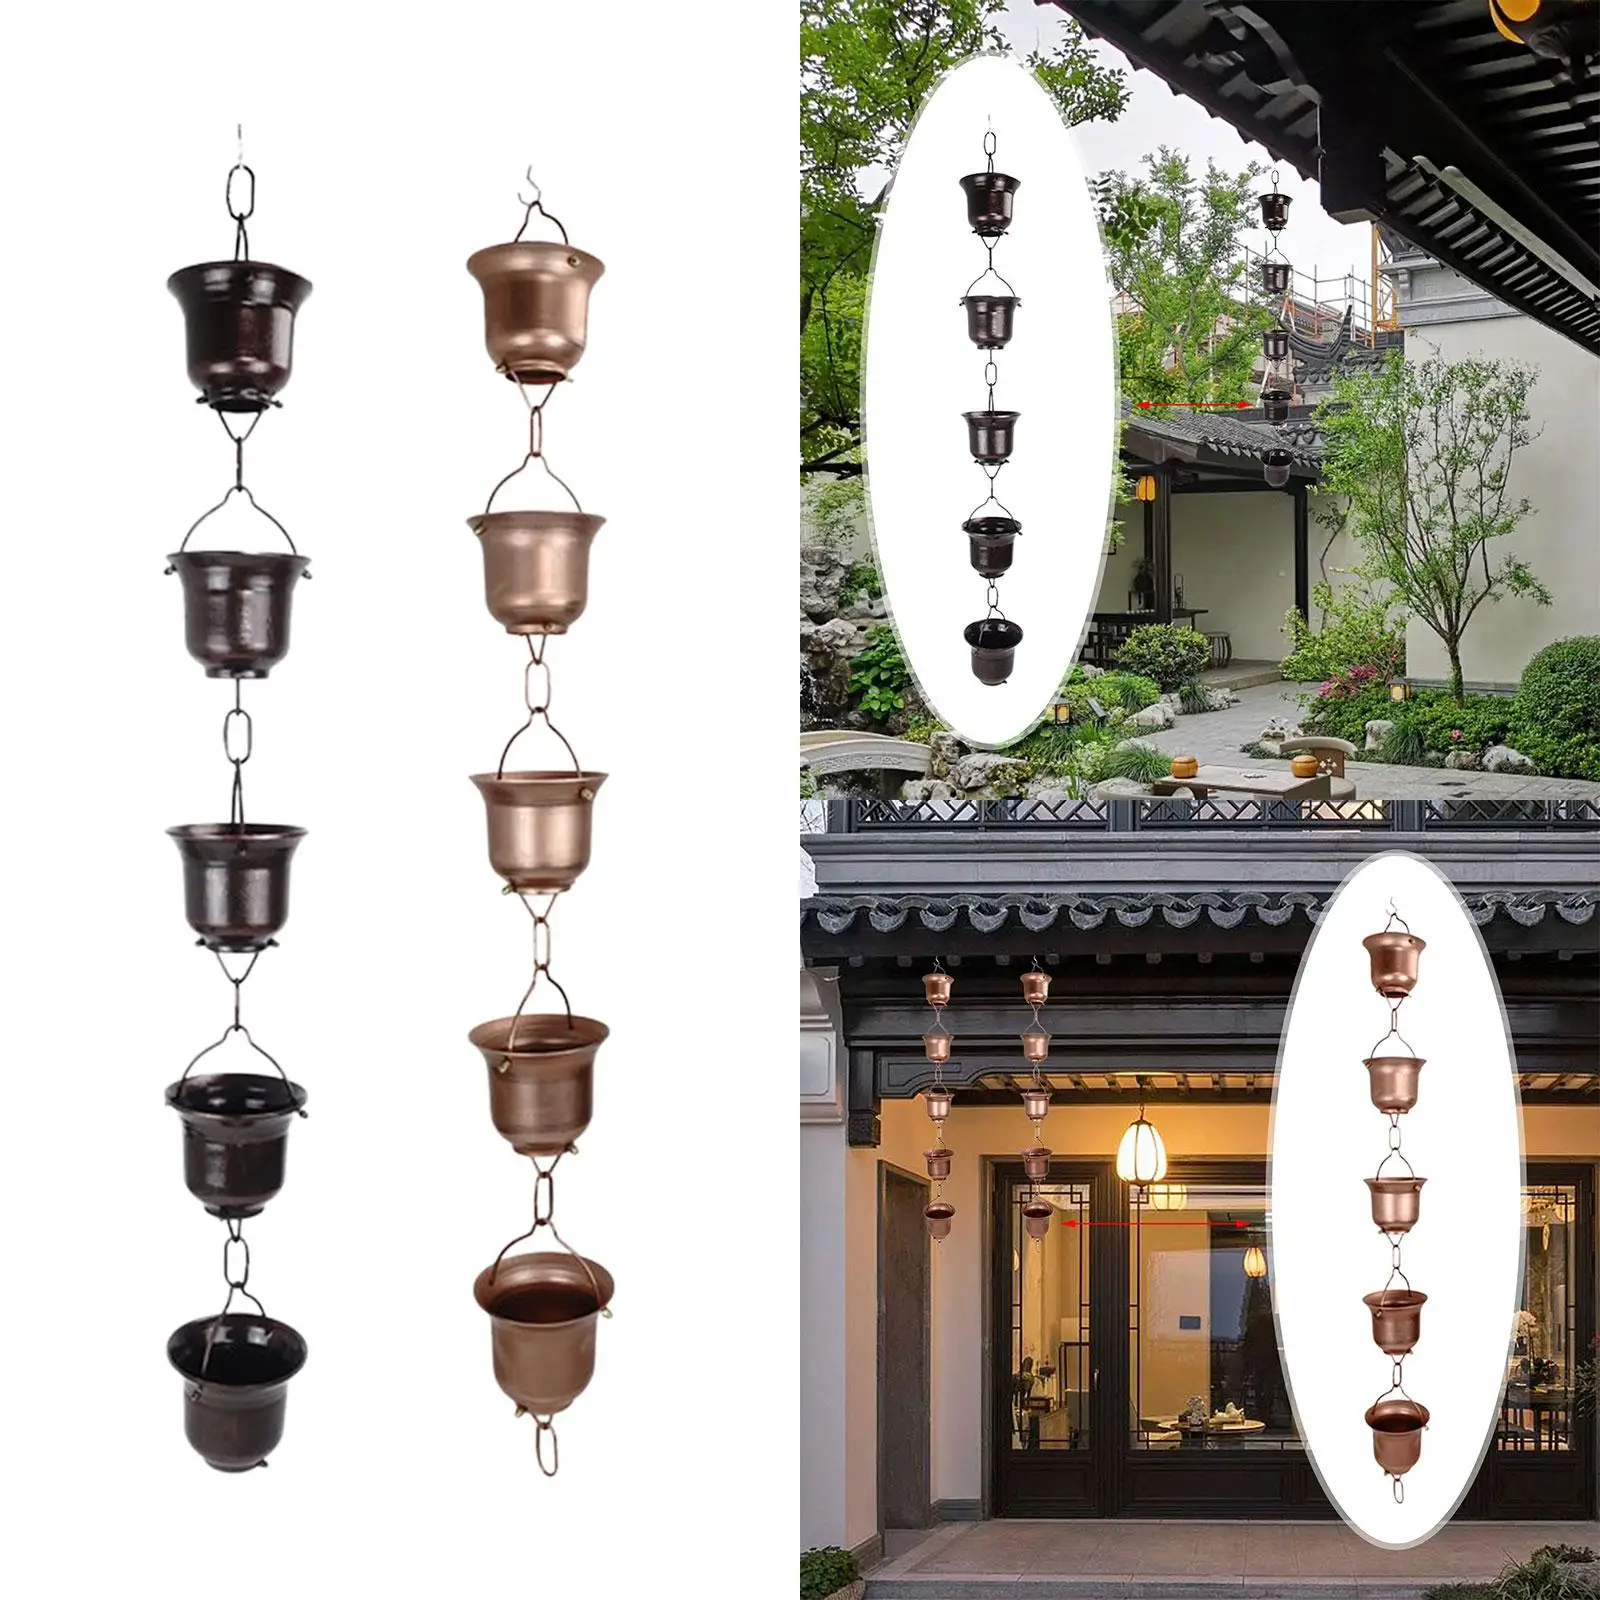 Metal Rainwater Catcher Chain Rain Collectors Cups Replace Decorative Functional Rain Chains for Yard Outdoor Sheds Garden Home